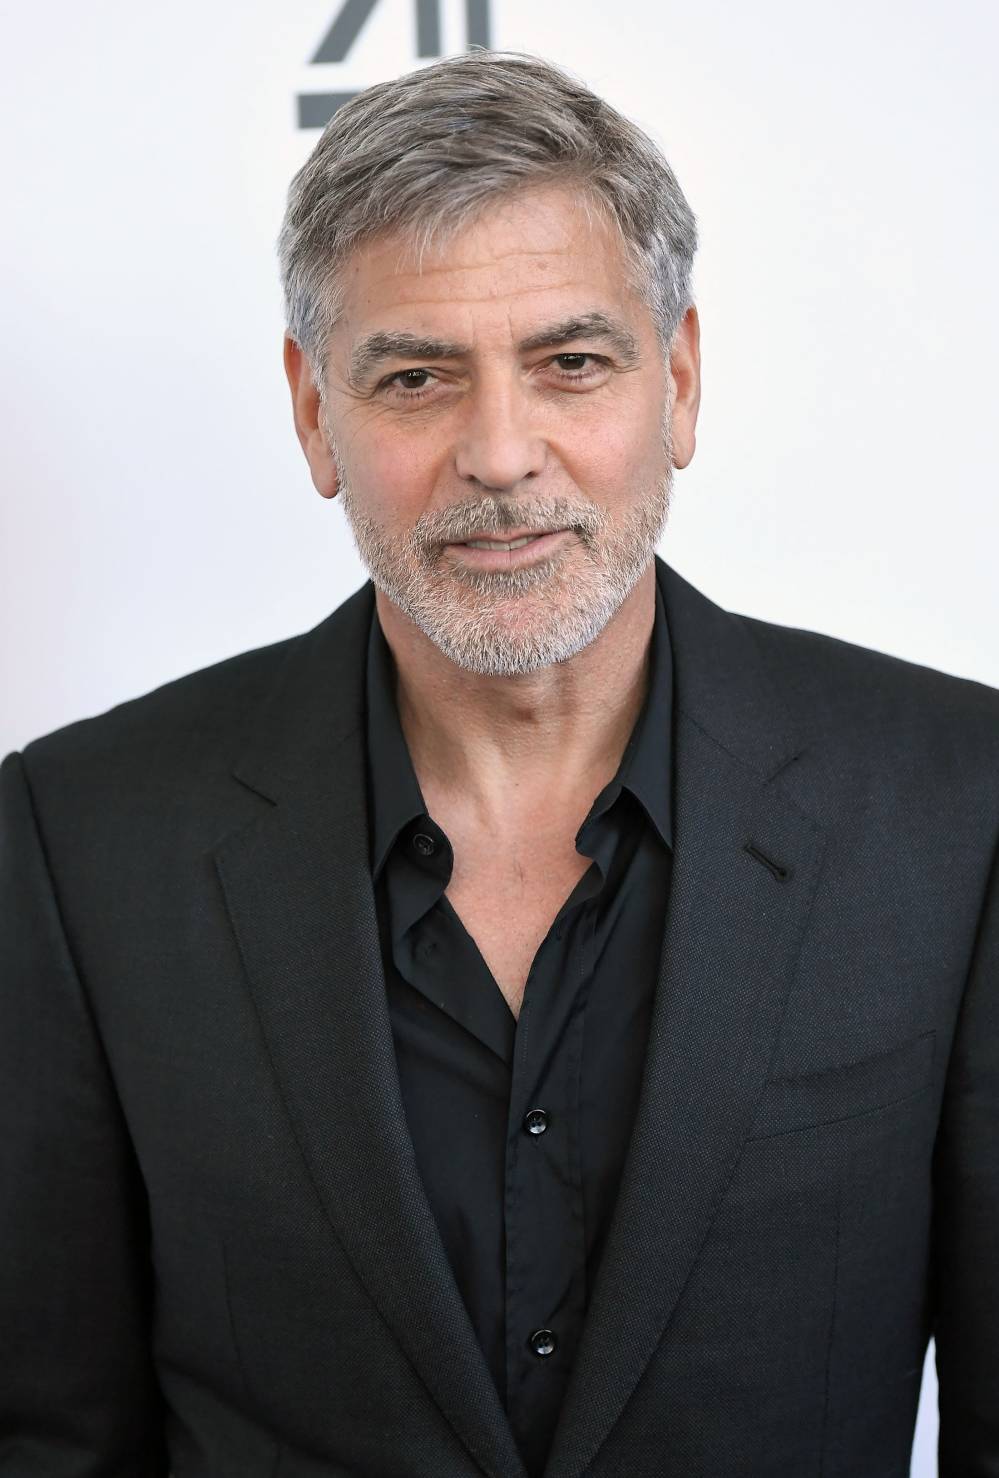 George Clooney Reveals He Was Hospitalized After Losing Weight Too ‘Quickly’